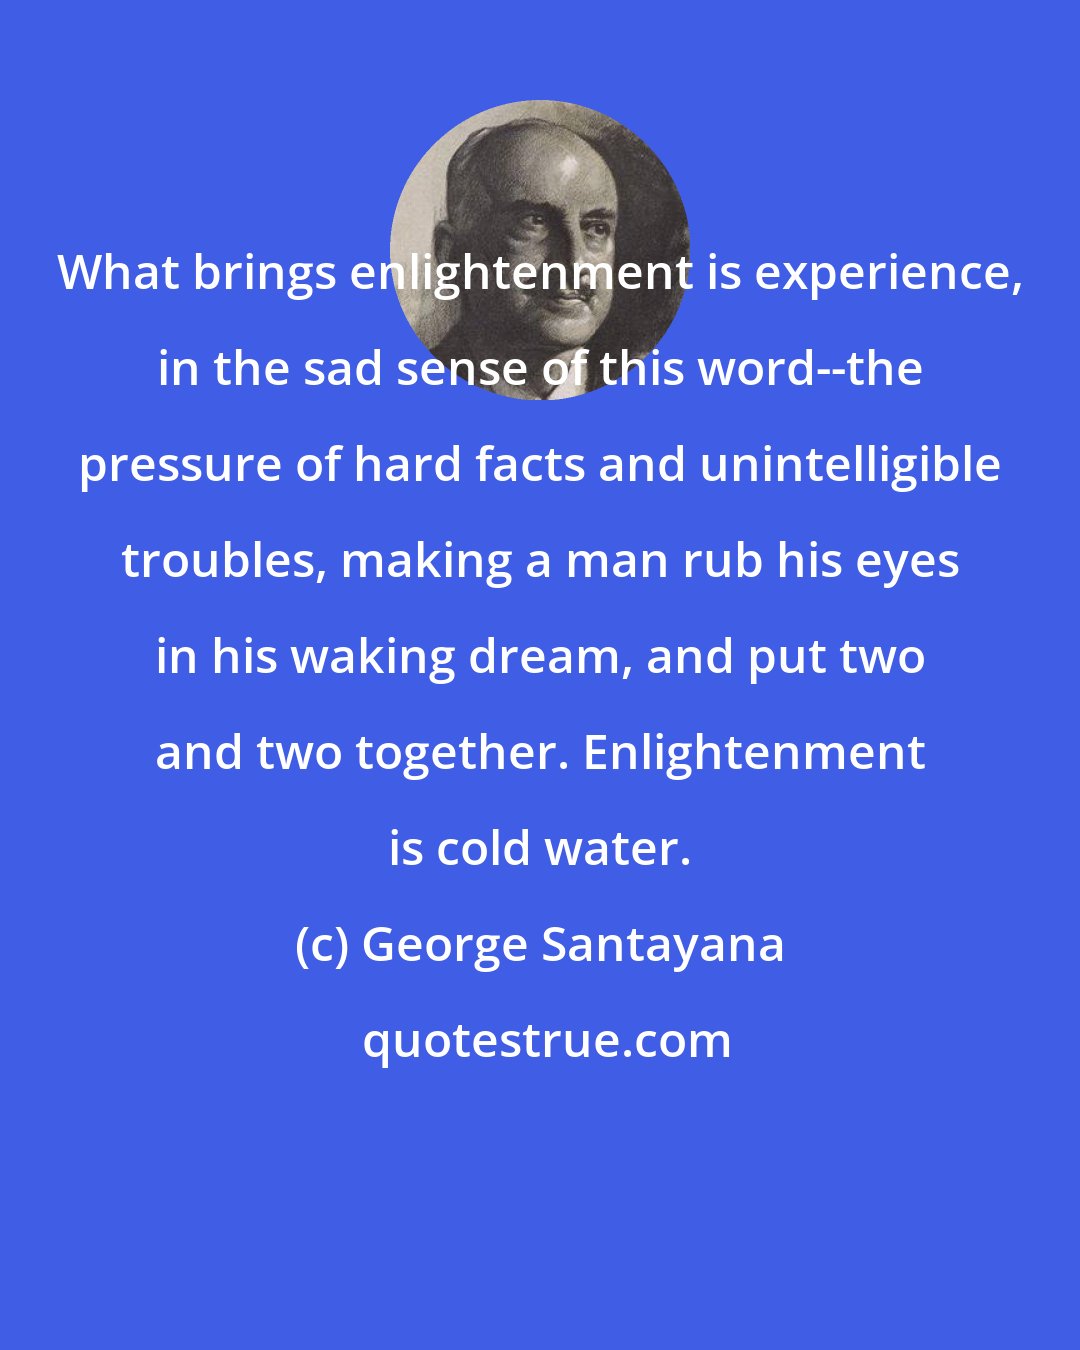 George Santayana: What brings enlightenment is experience, in the sad sense of this word--the pressure of hard facts and unintelligible troubles, making a man rub his eyes in his waking dream, and put two and two together. Enlightenment is cold water.